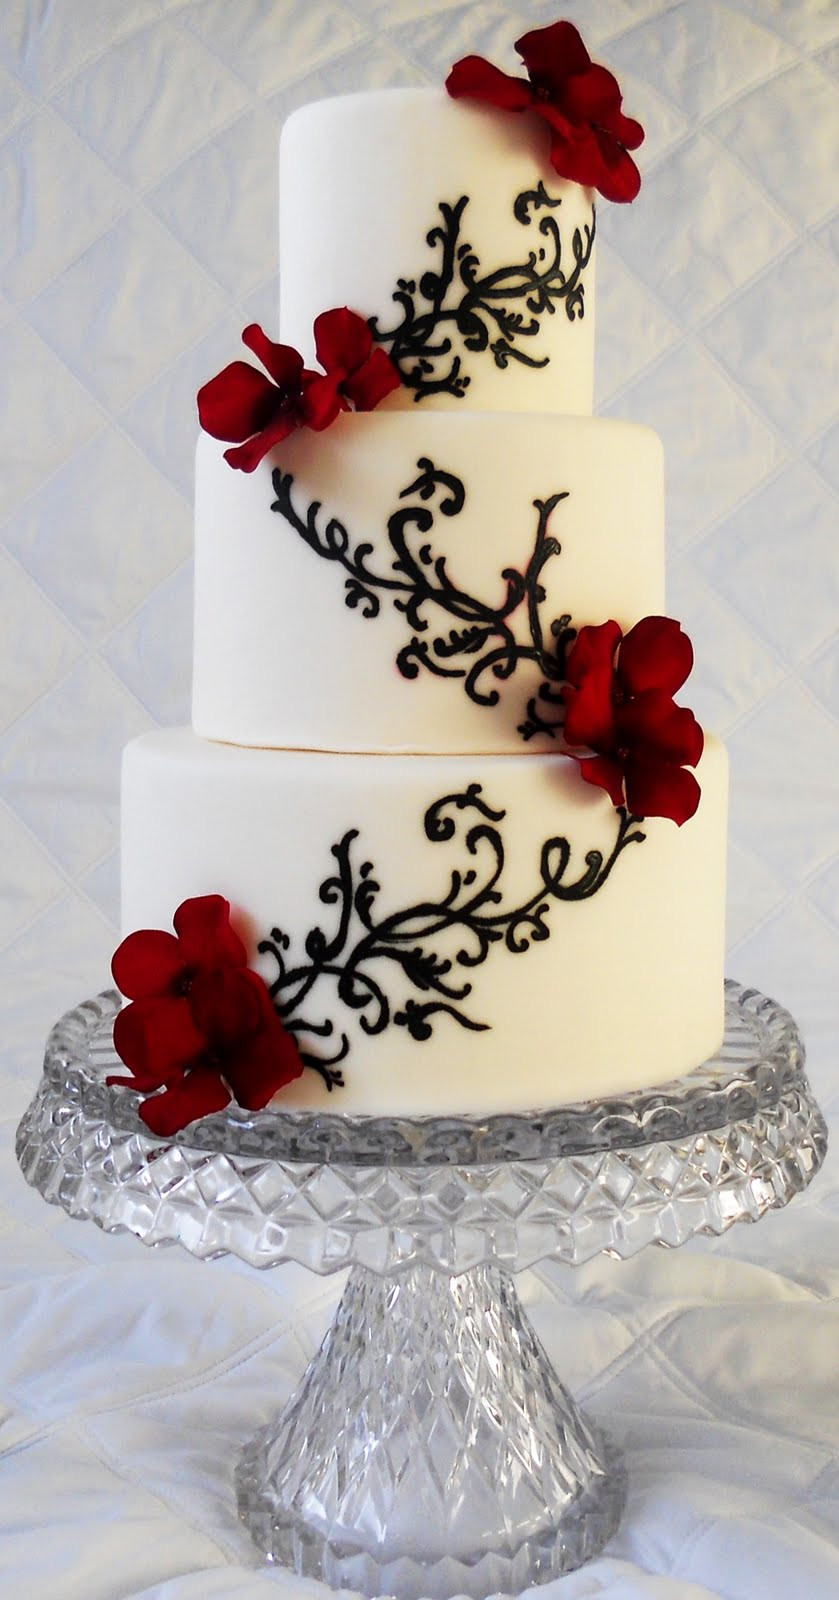 Red White And Black Wedding Cakes
 Memorable Wedding Find the Best Red Black and White